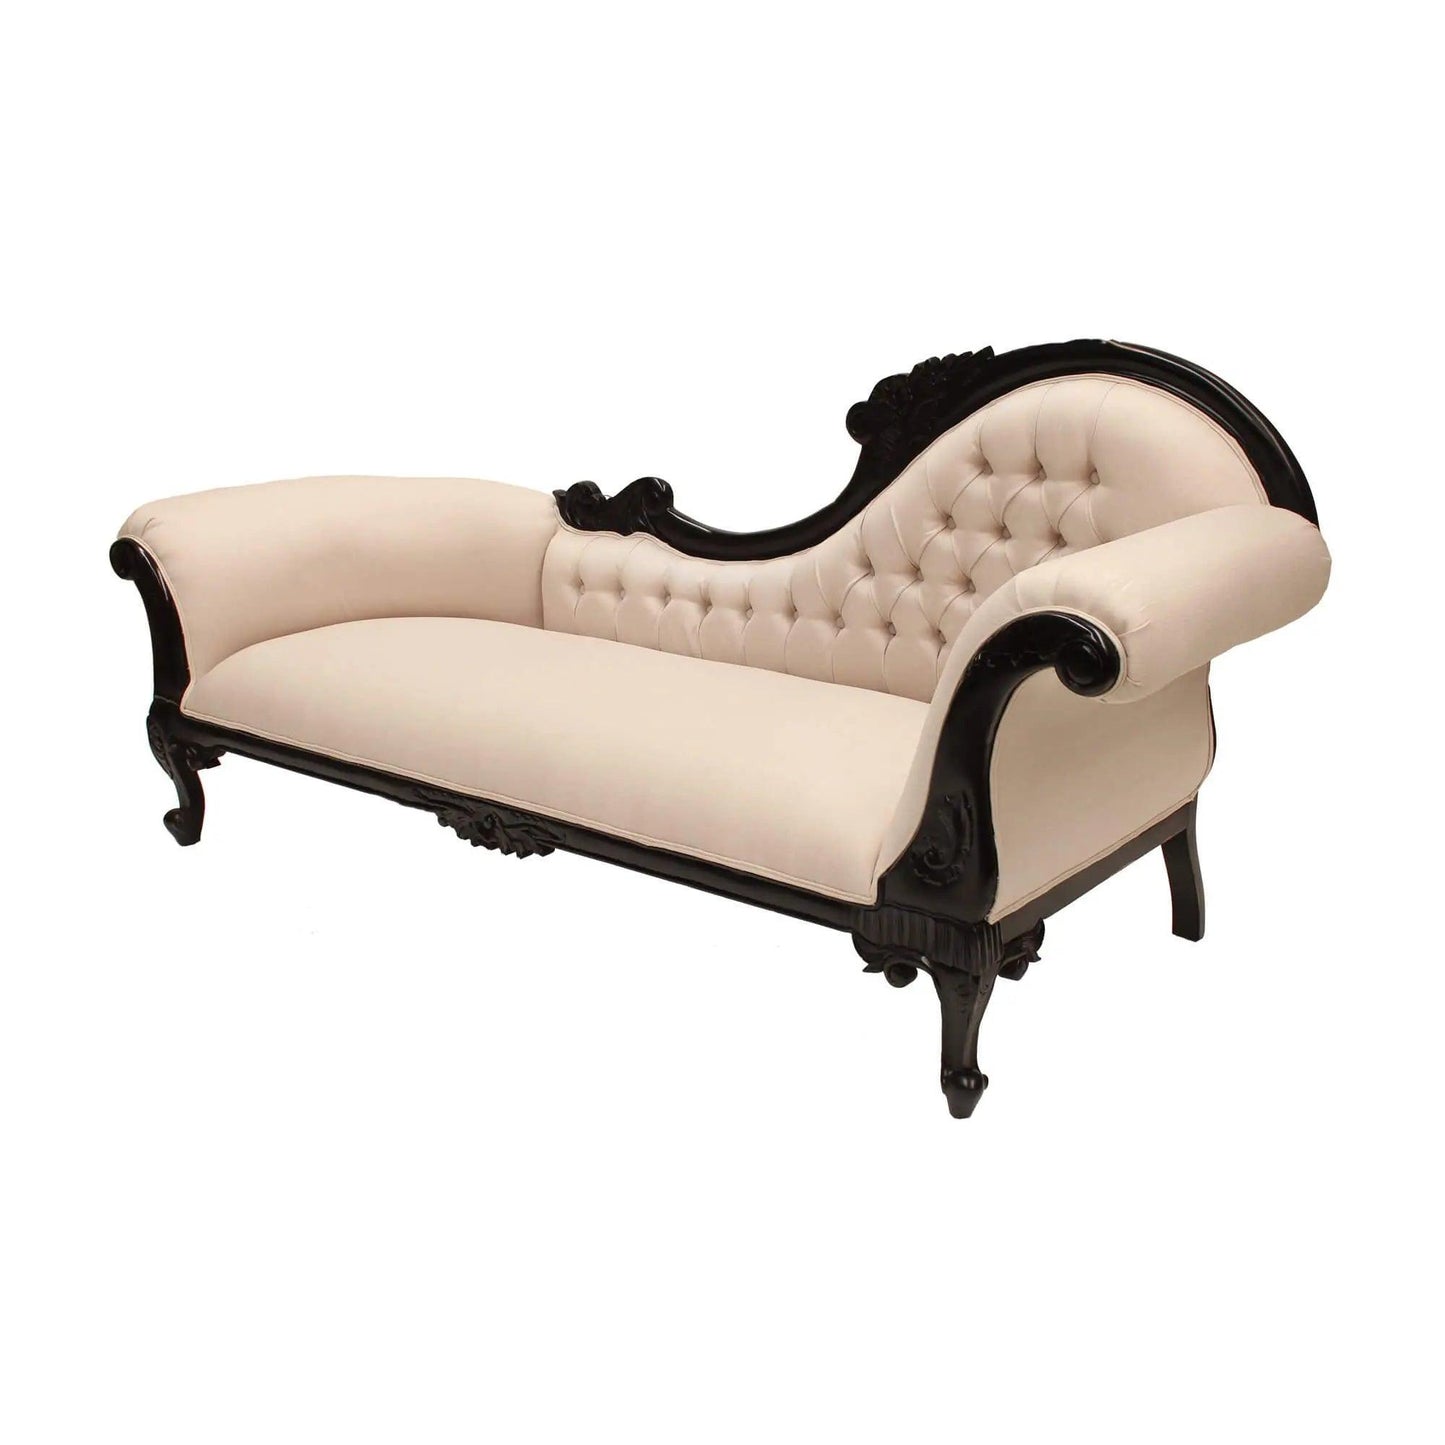 Right Side High Large Carved Chaise Lounge - SofasMCHA108RTER9360245000991 3